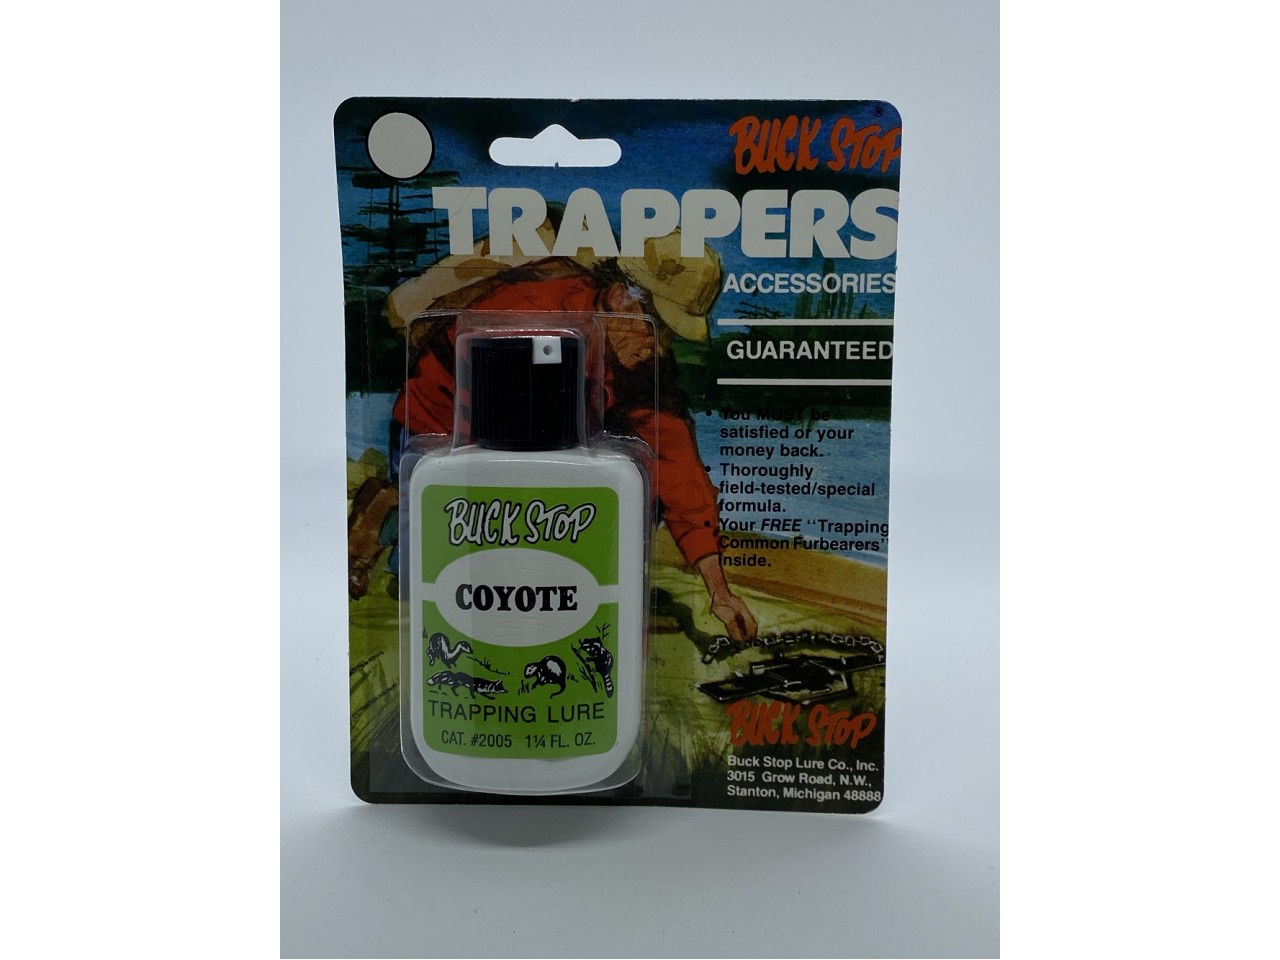 COYOTE TRAPPING LURE 1 1/4 oz